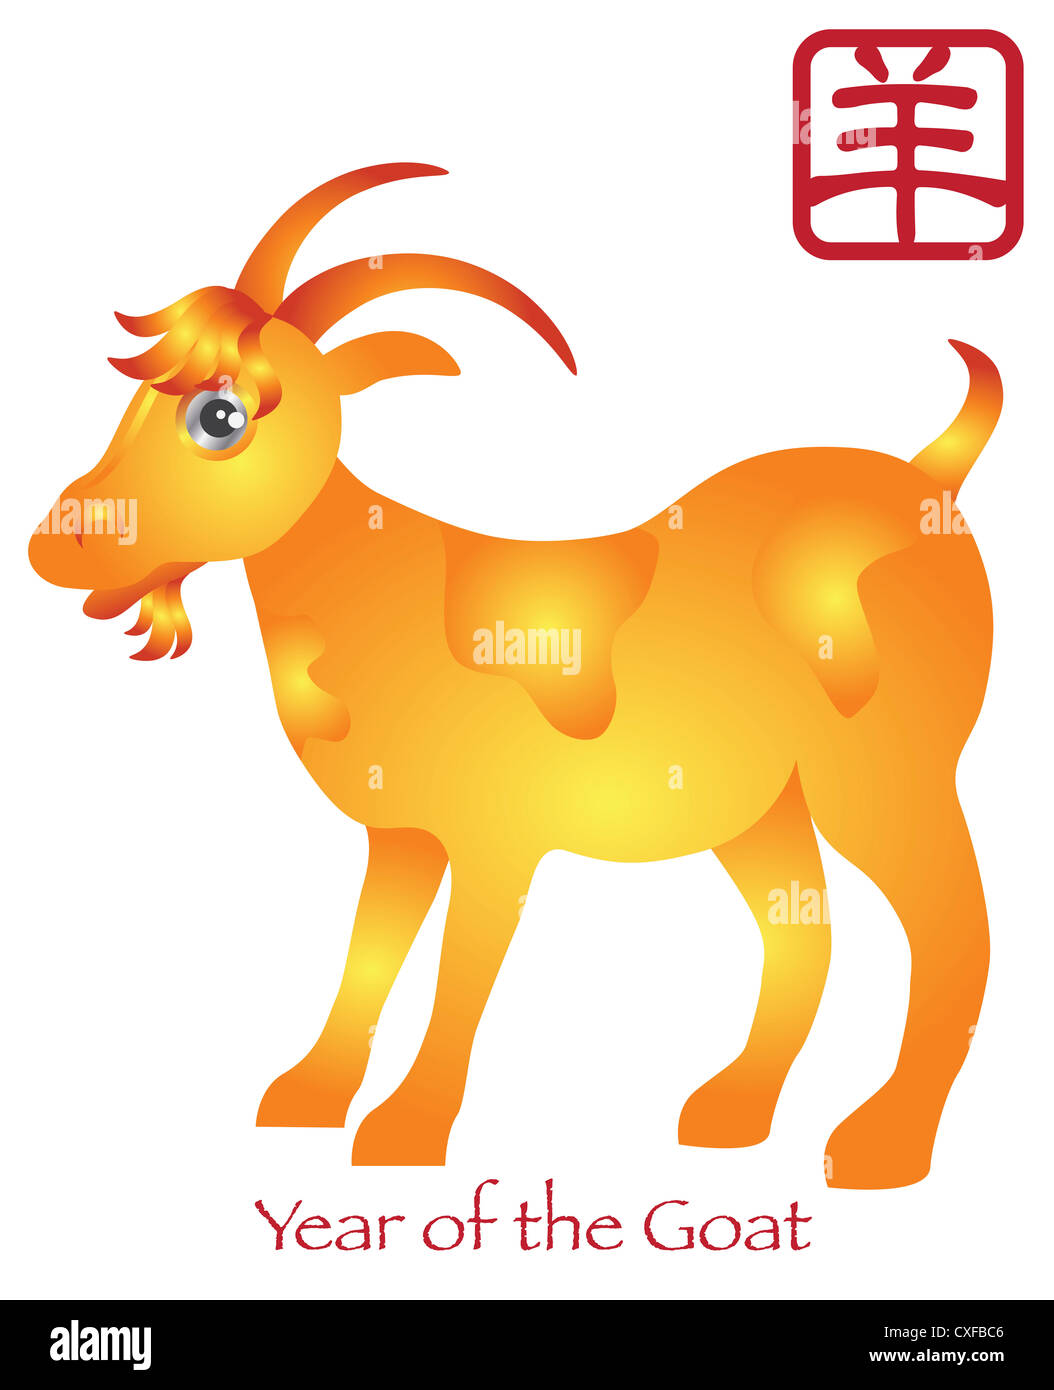 Year Of The Goat Chinese Zodiac, Personality, Horoscope, 47 OFF